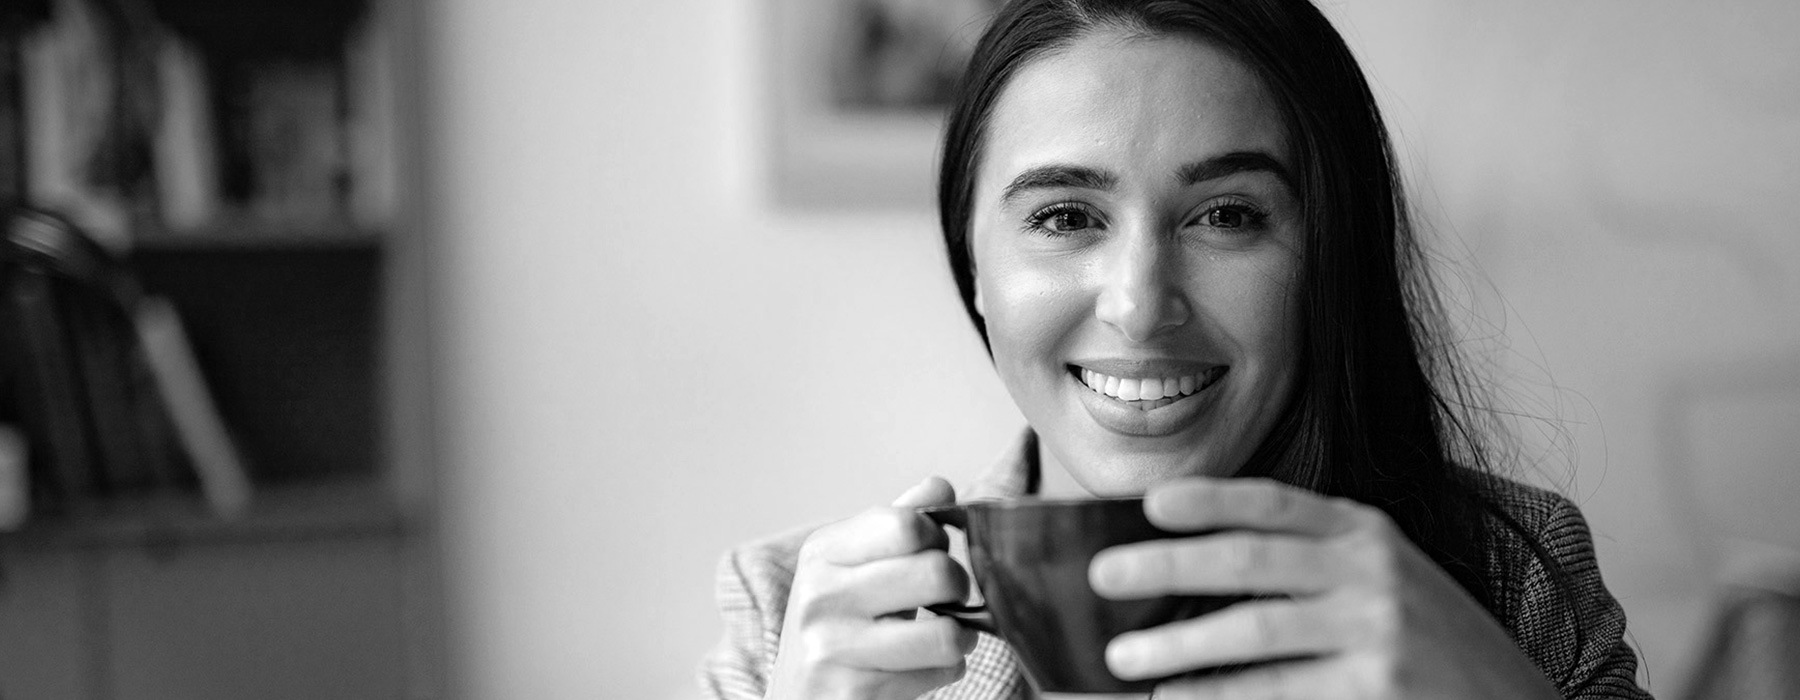 lifestyle image of a smiling woman with a cup of coffee